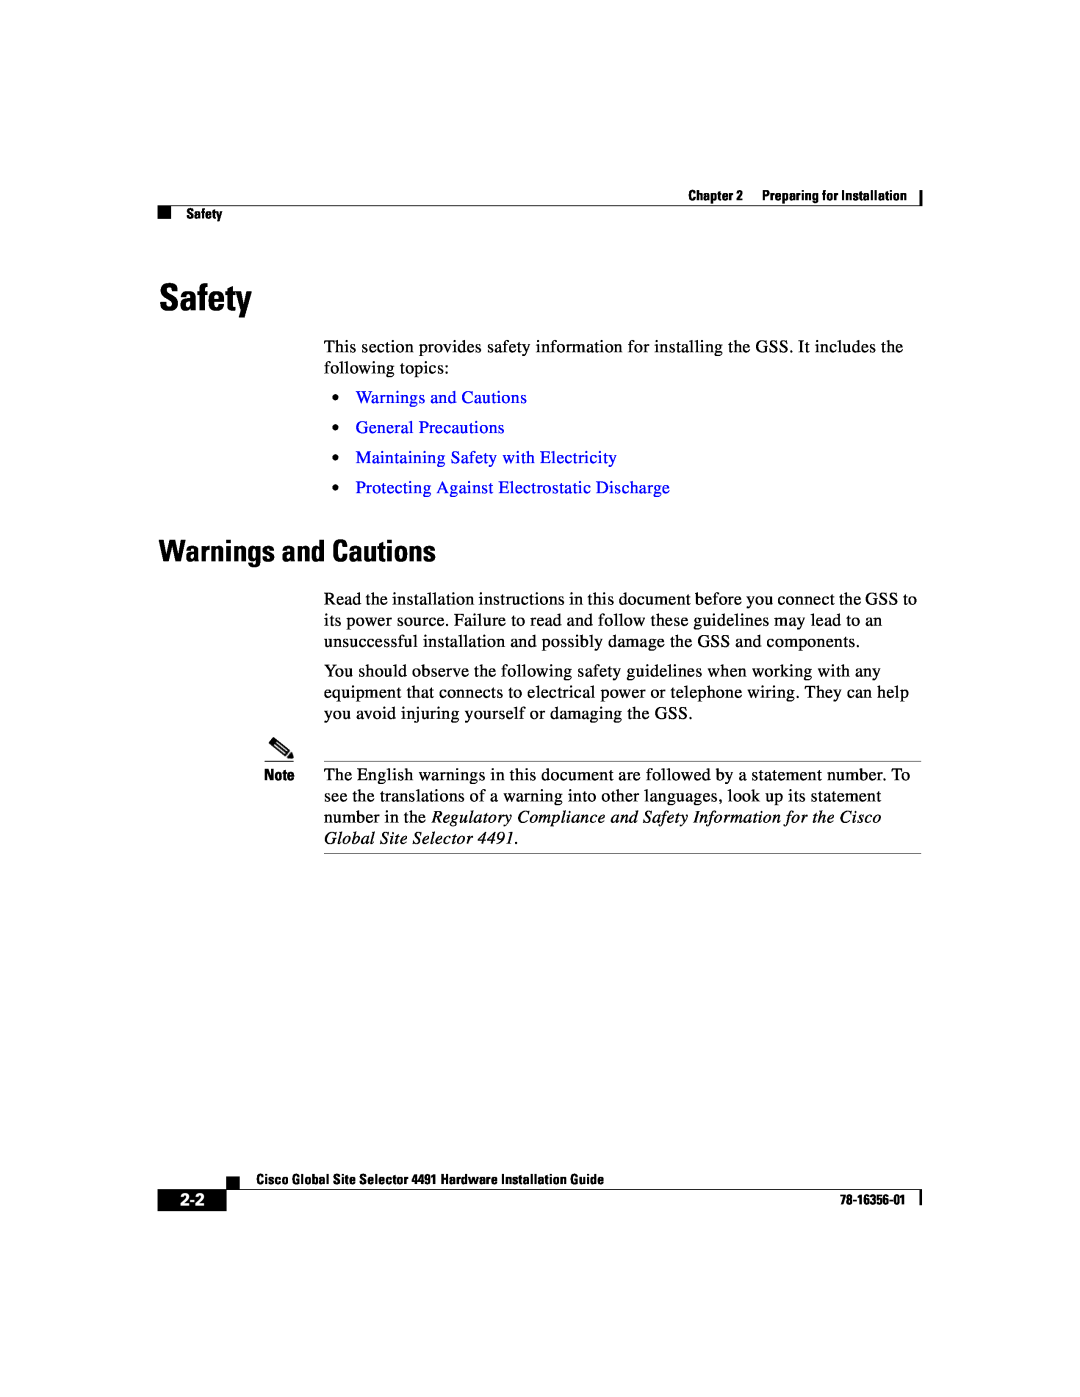 Cisco Systems 78-16356-01 manual Warnings and Cautions General Precautions, Maintaining Safety with Electricity 